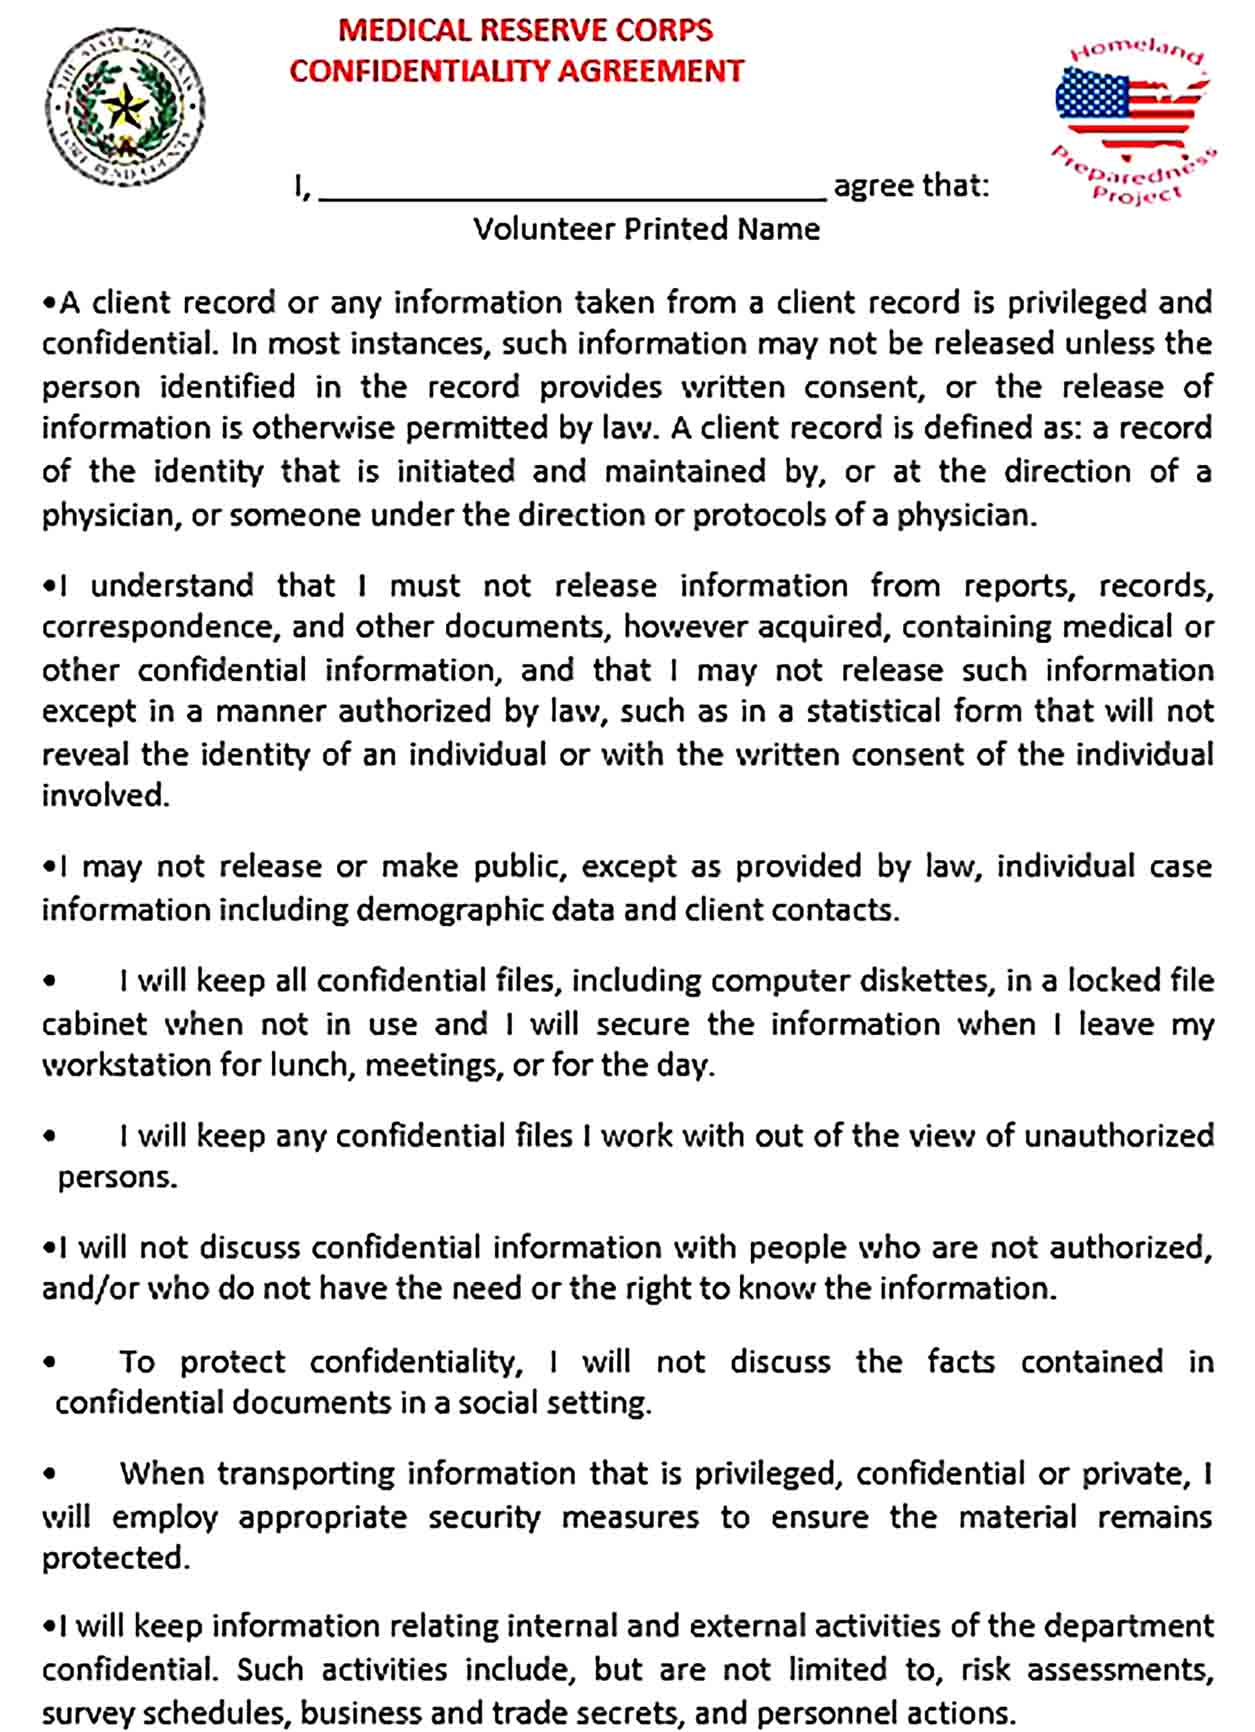 Sample Medical Confidentiality Agreement Form